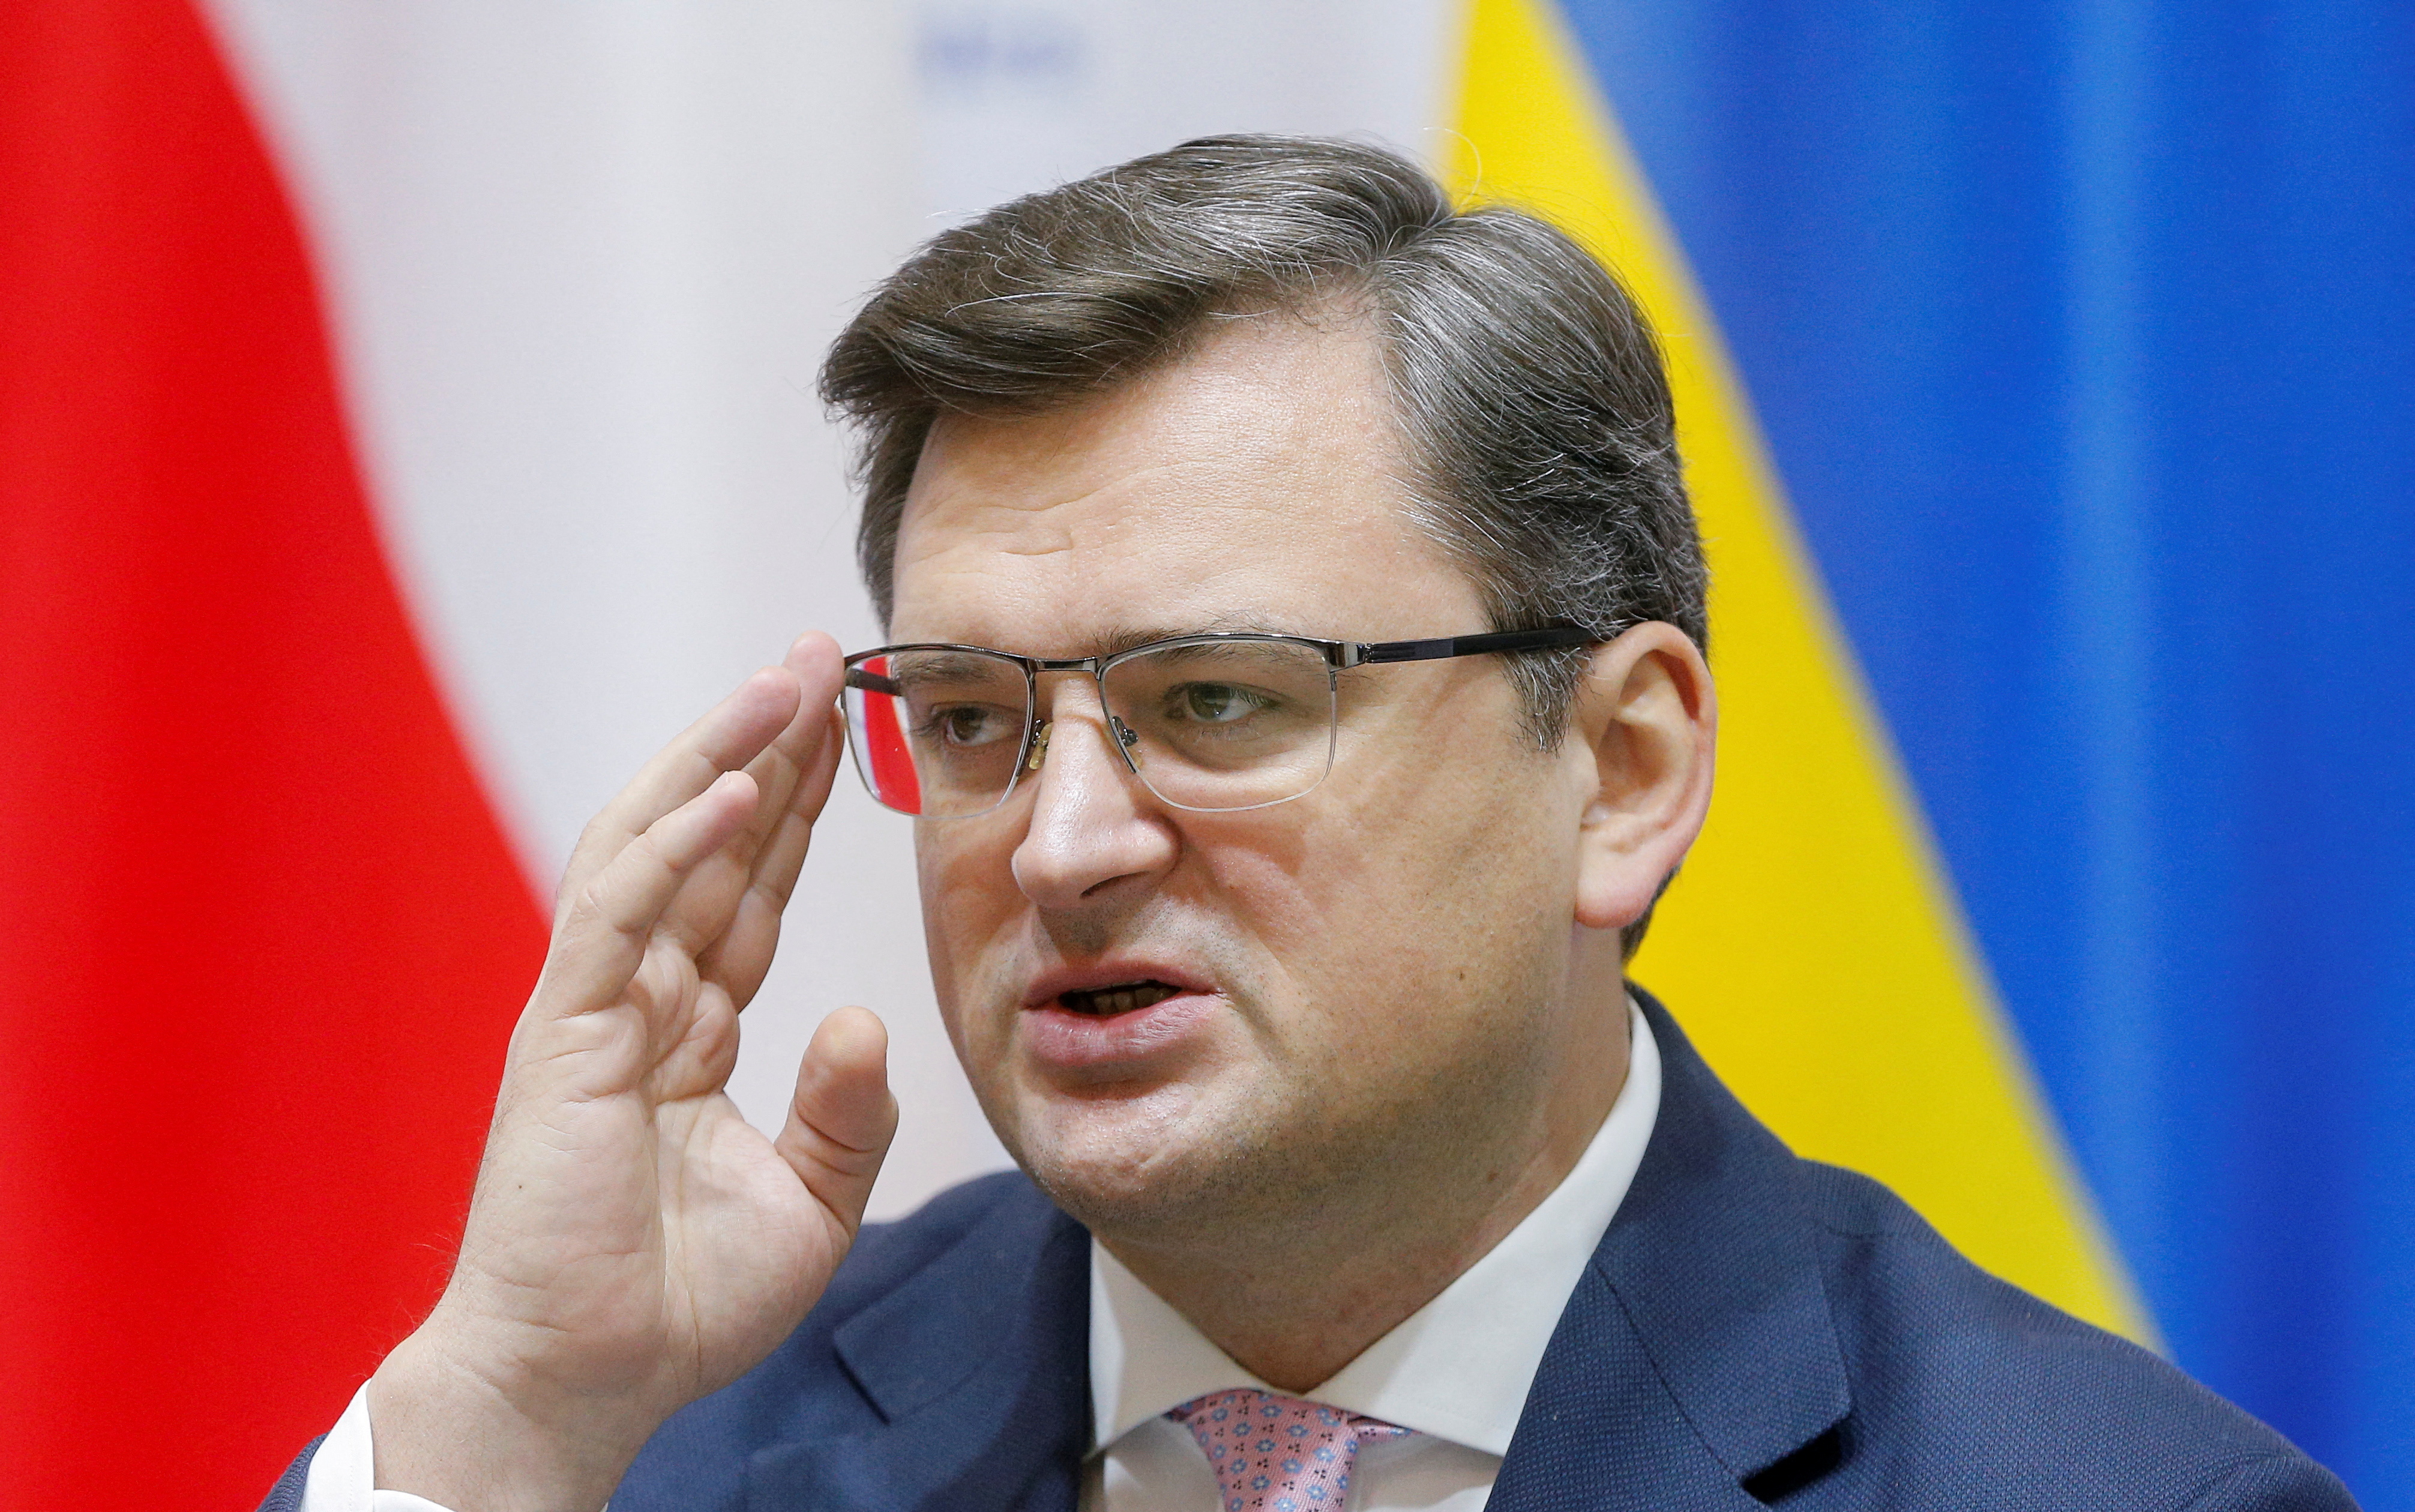 Foreign Ministers of Ukraine, Czech Republic, Slovakia, Austria hold briefing in Kyiv